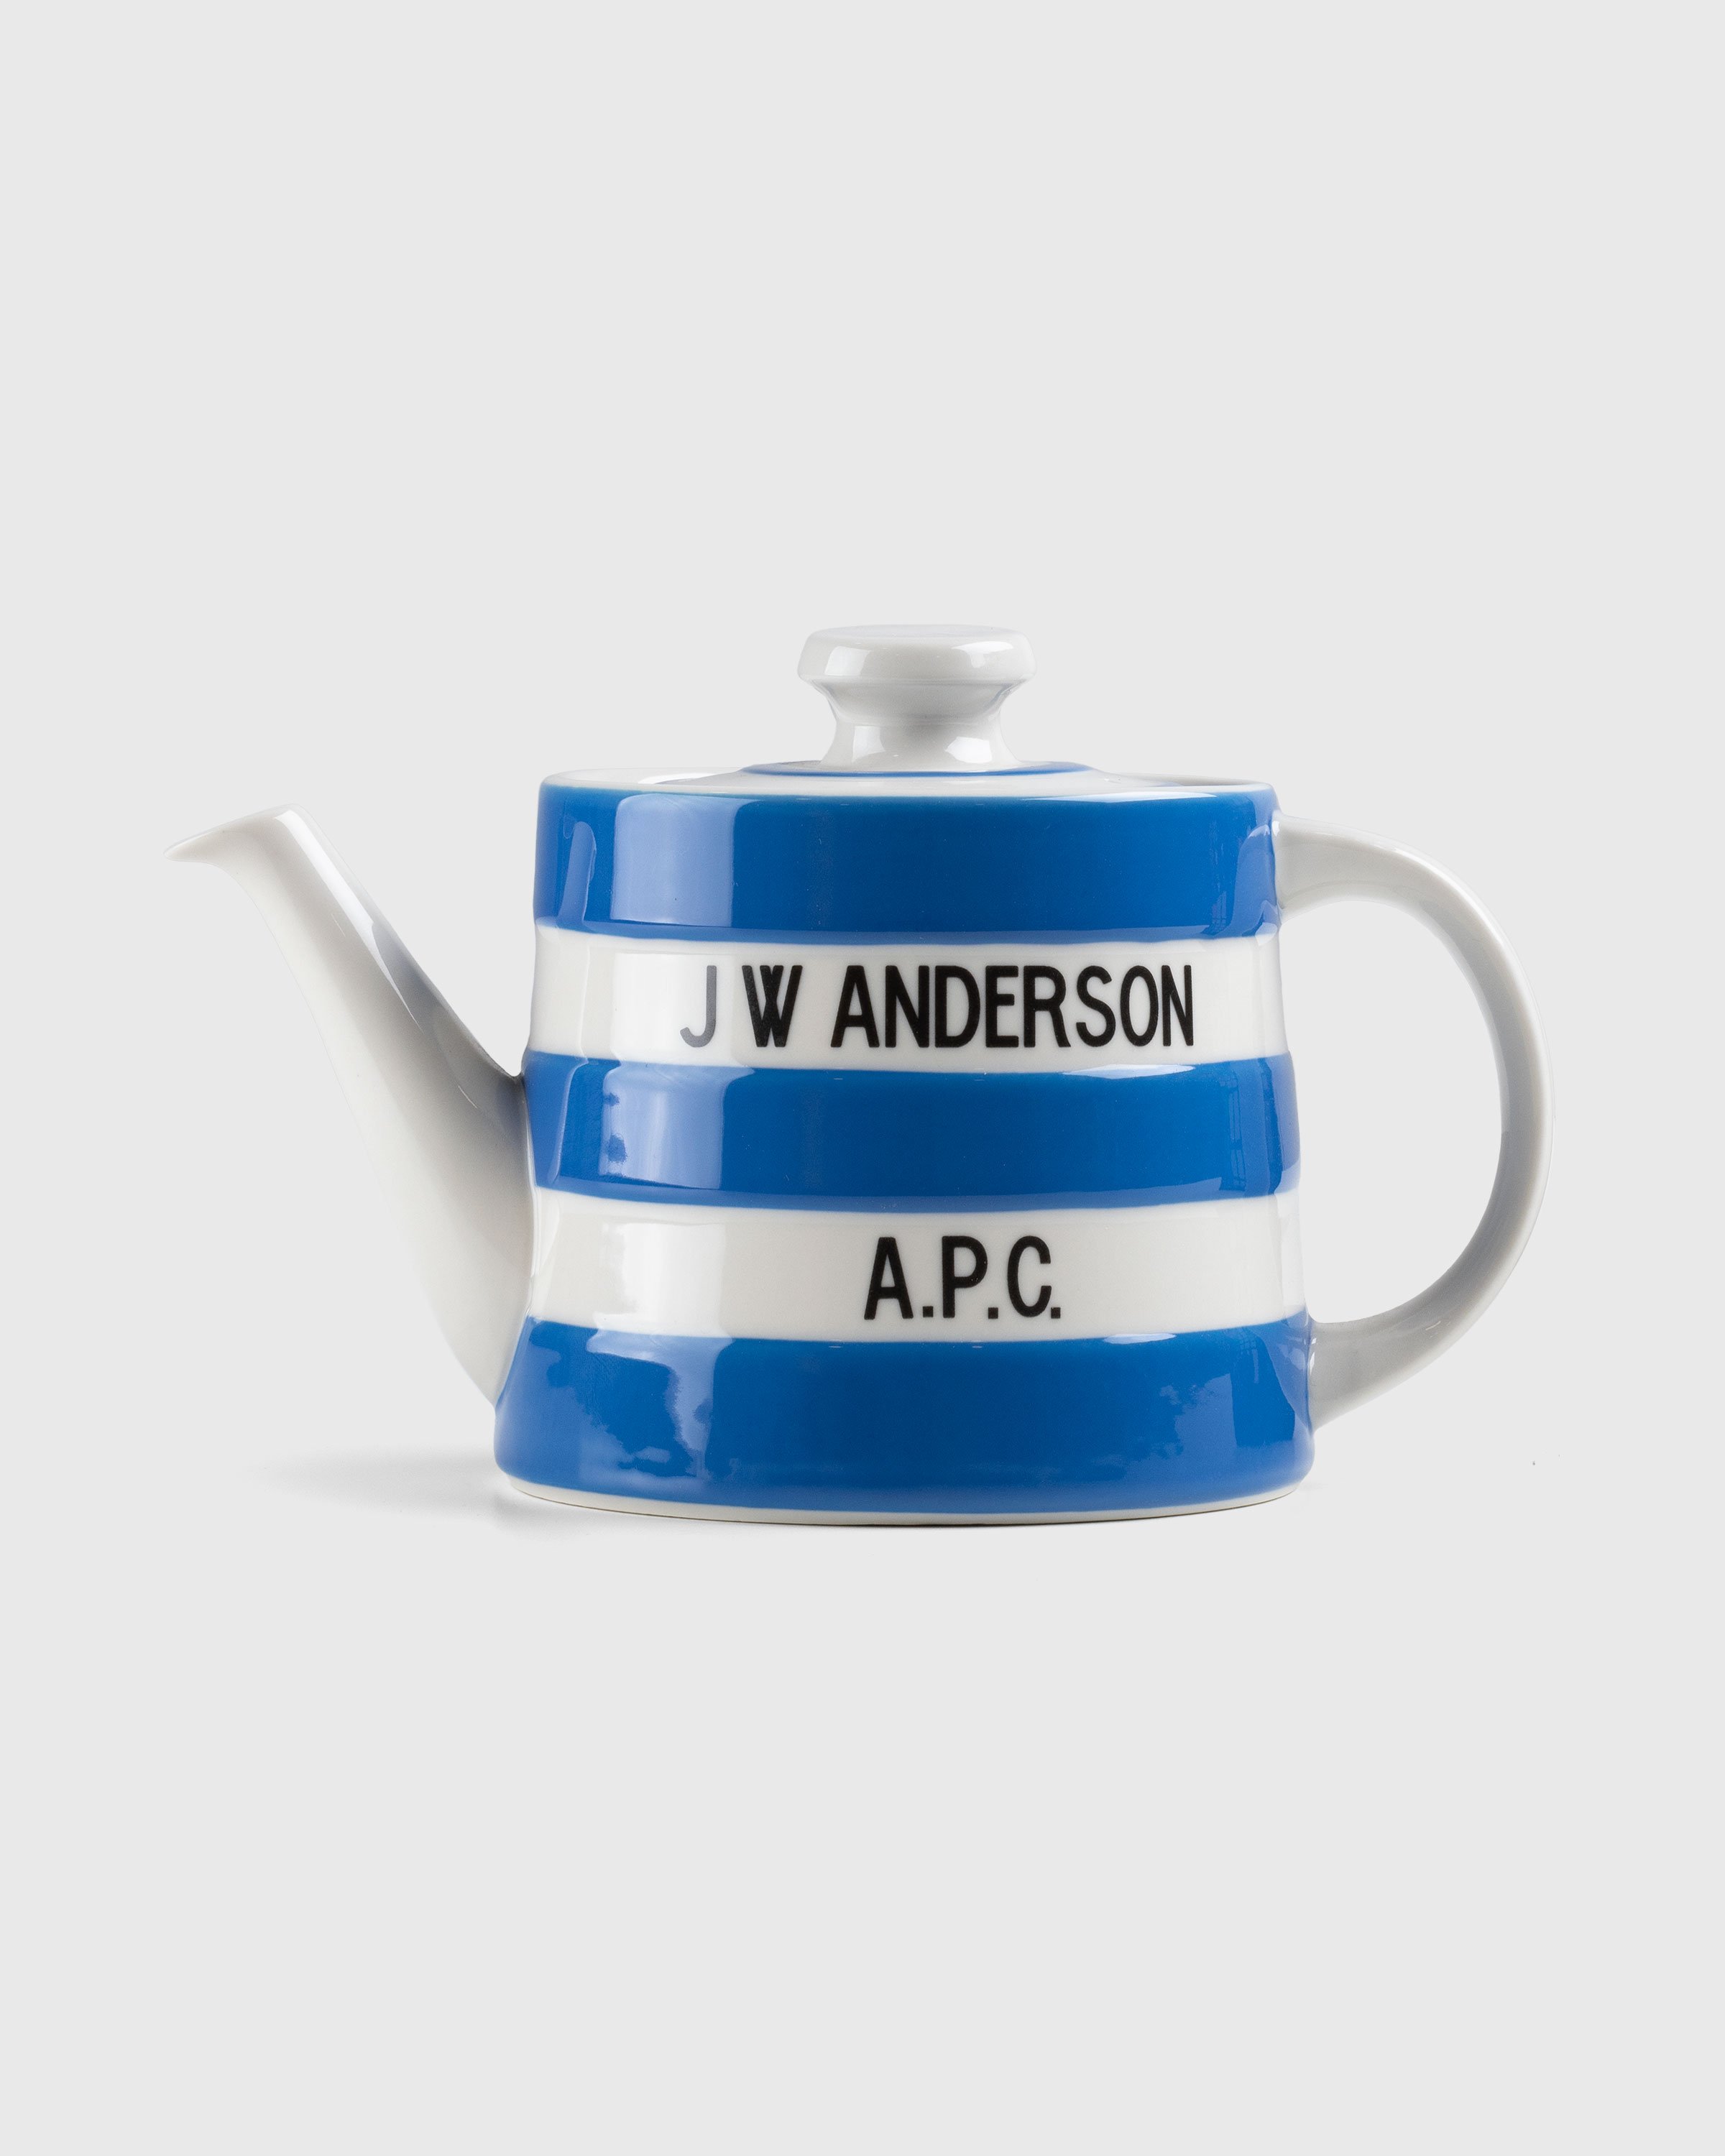 A.P.C. x J.W. Anderson - Afternoon Teapot  - Lifestyle - Blue - Image 1